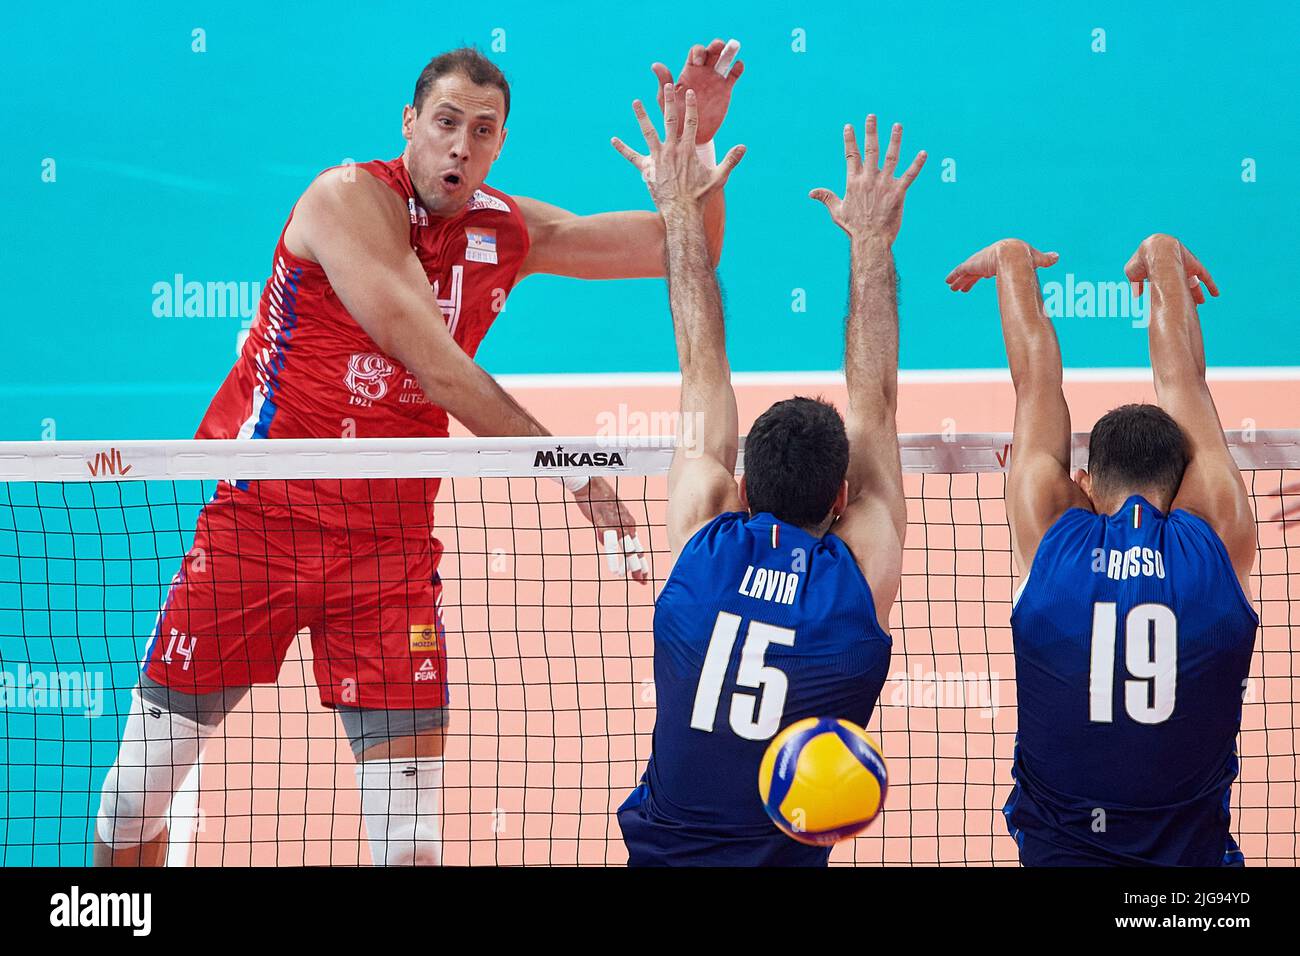 Gdansk, Poland. 08th July, 2022. Roberto Russo (R) and Daniele Lavia (C) from Italy in action against Aleksandar Atanasijevic (L) from Serbia during the 2022 men's FIVB Volleyball Nations League match between Italy and Serbia in Gdansk, Poland, 08 July 2022. Credit: PAP/Alamy Live News Stock Photo